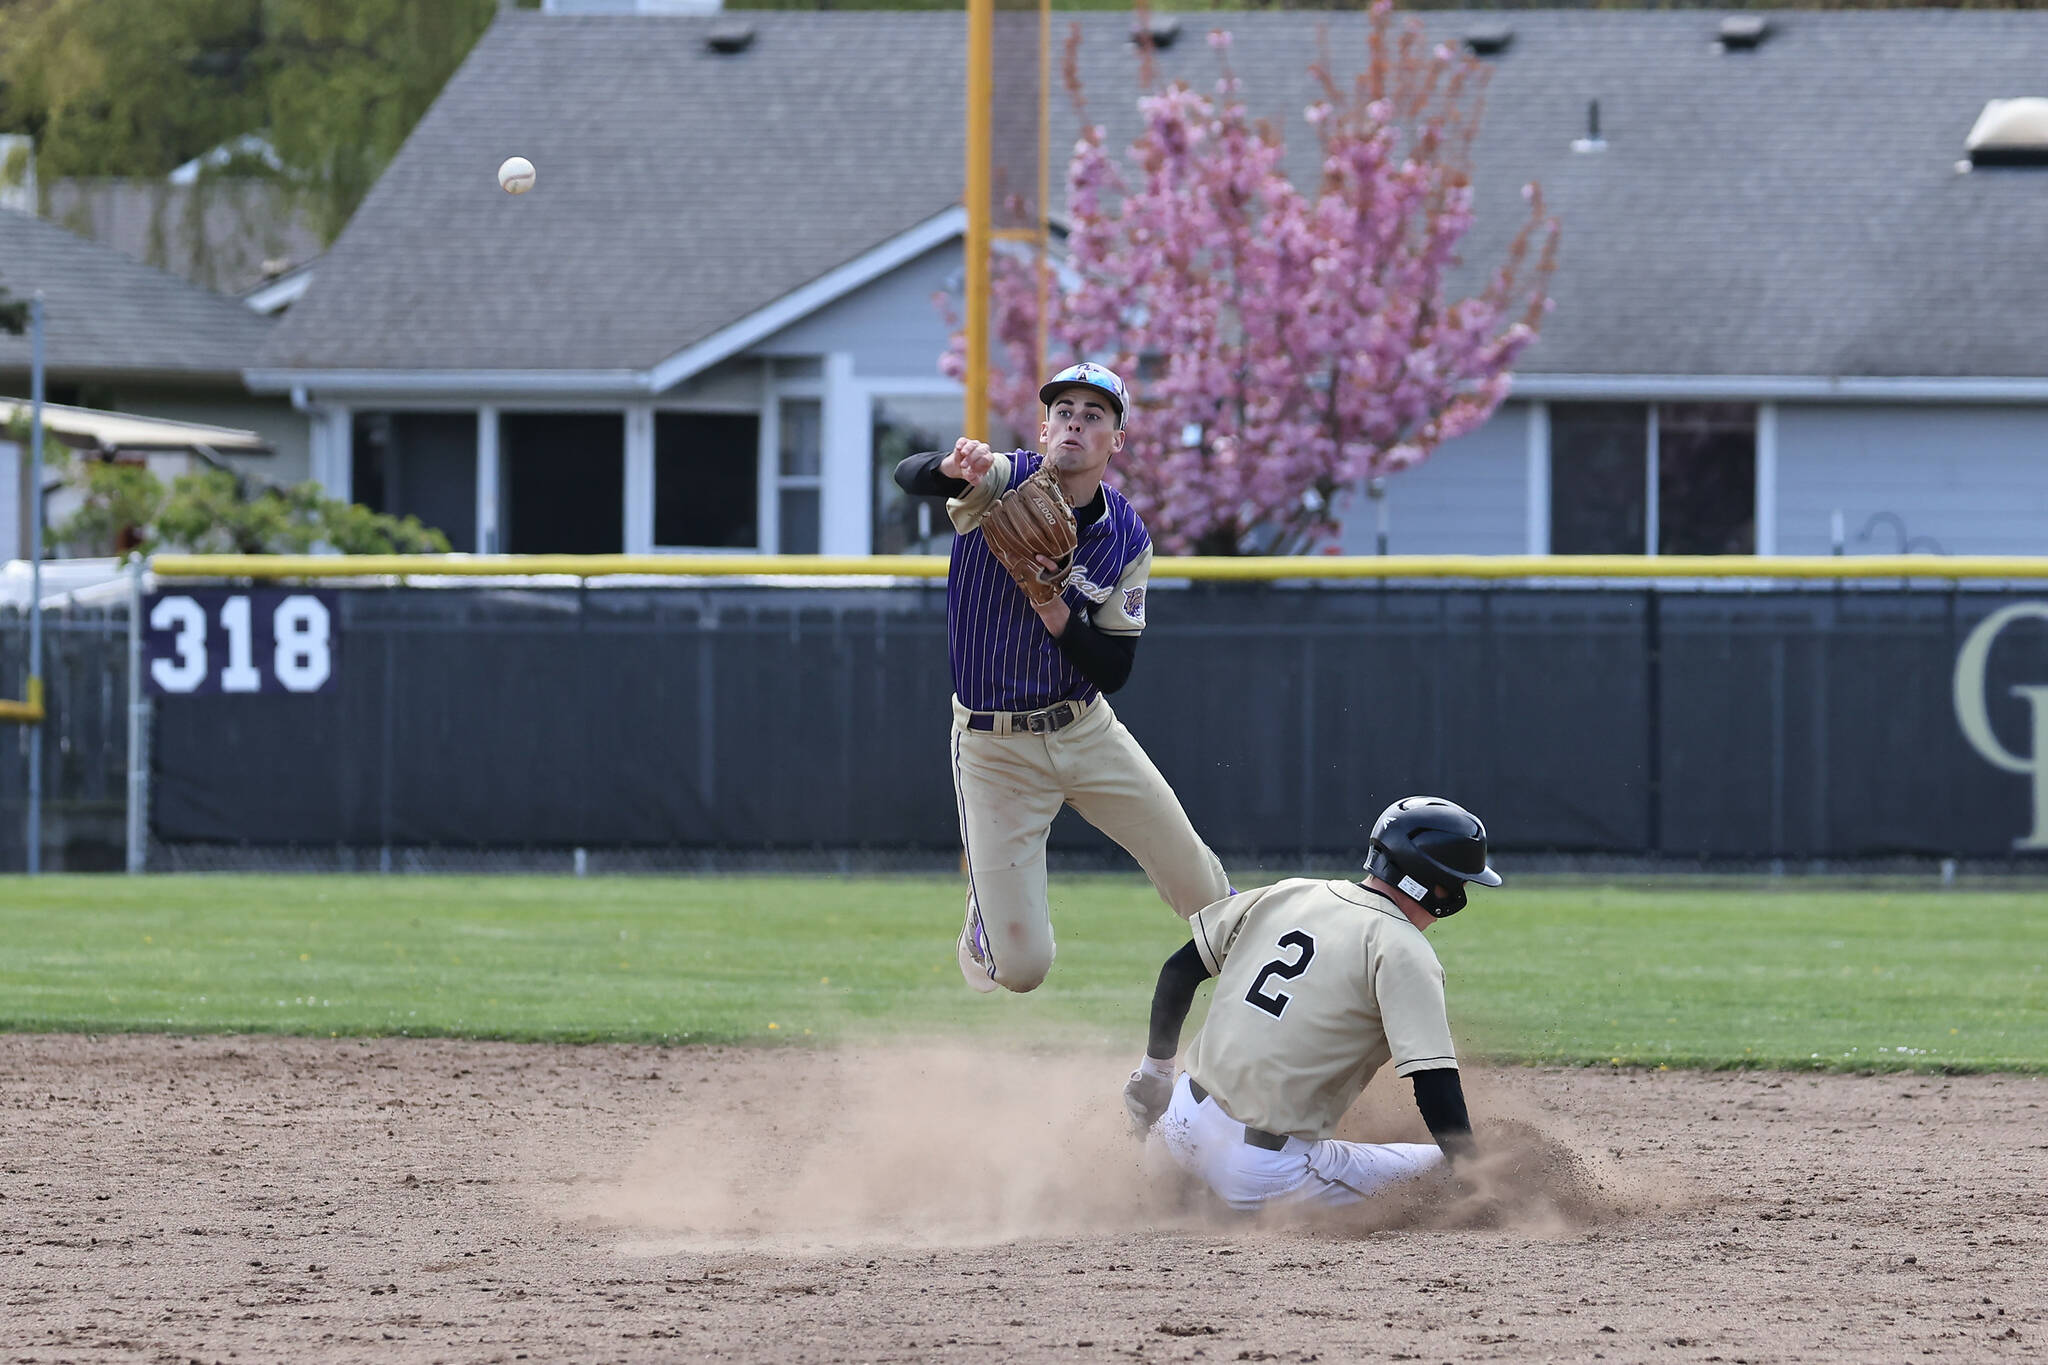 Gage McLeod goes for the ball. (Photo by John Fisken)